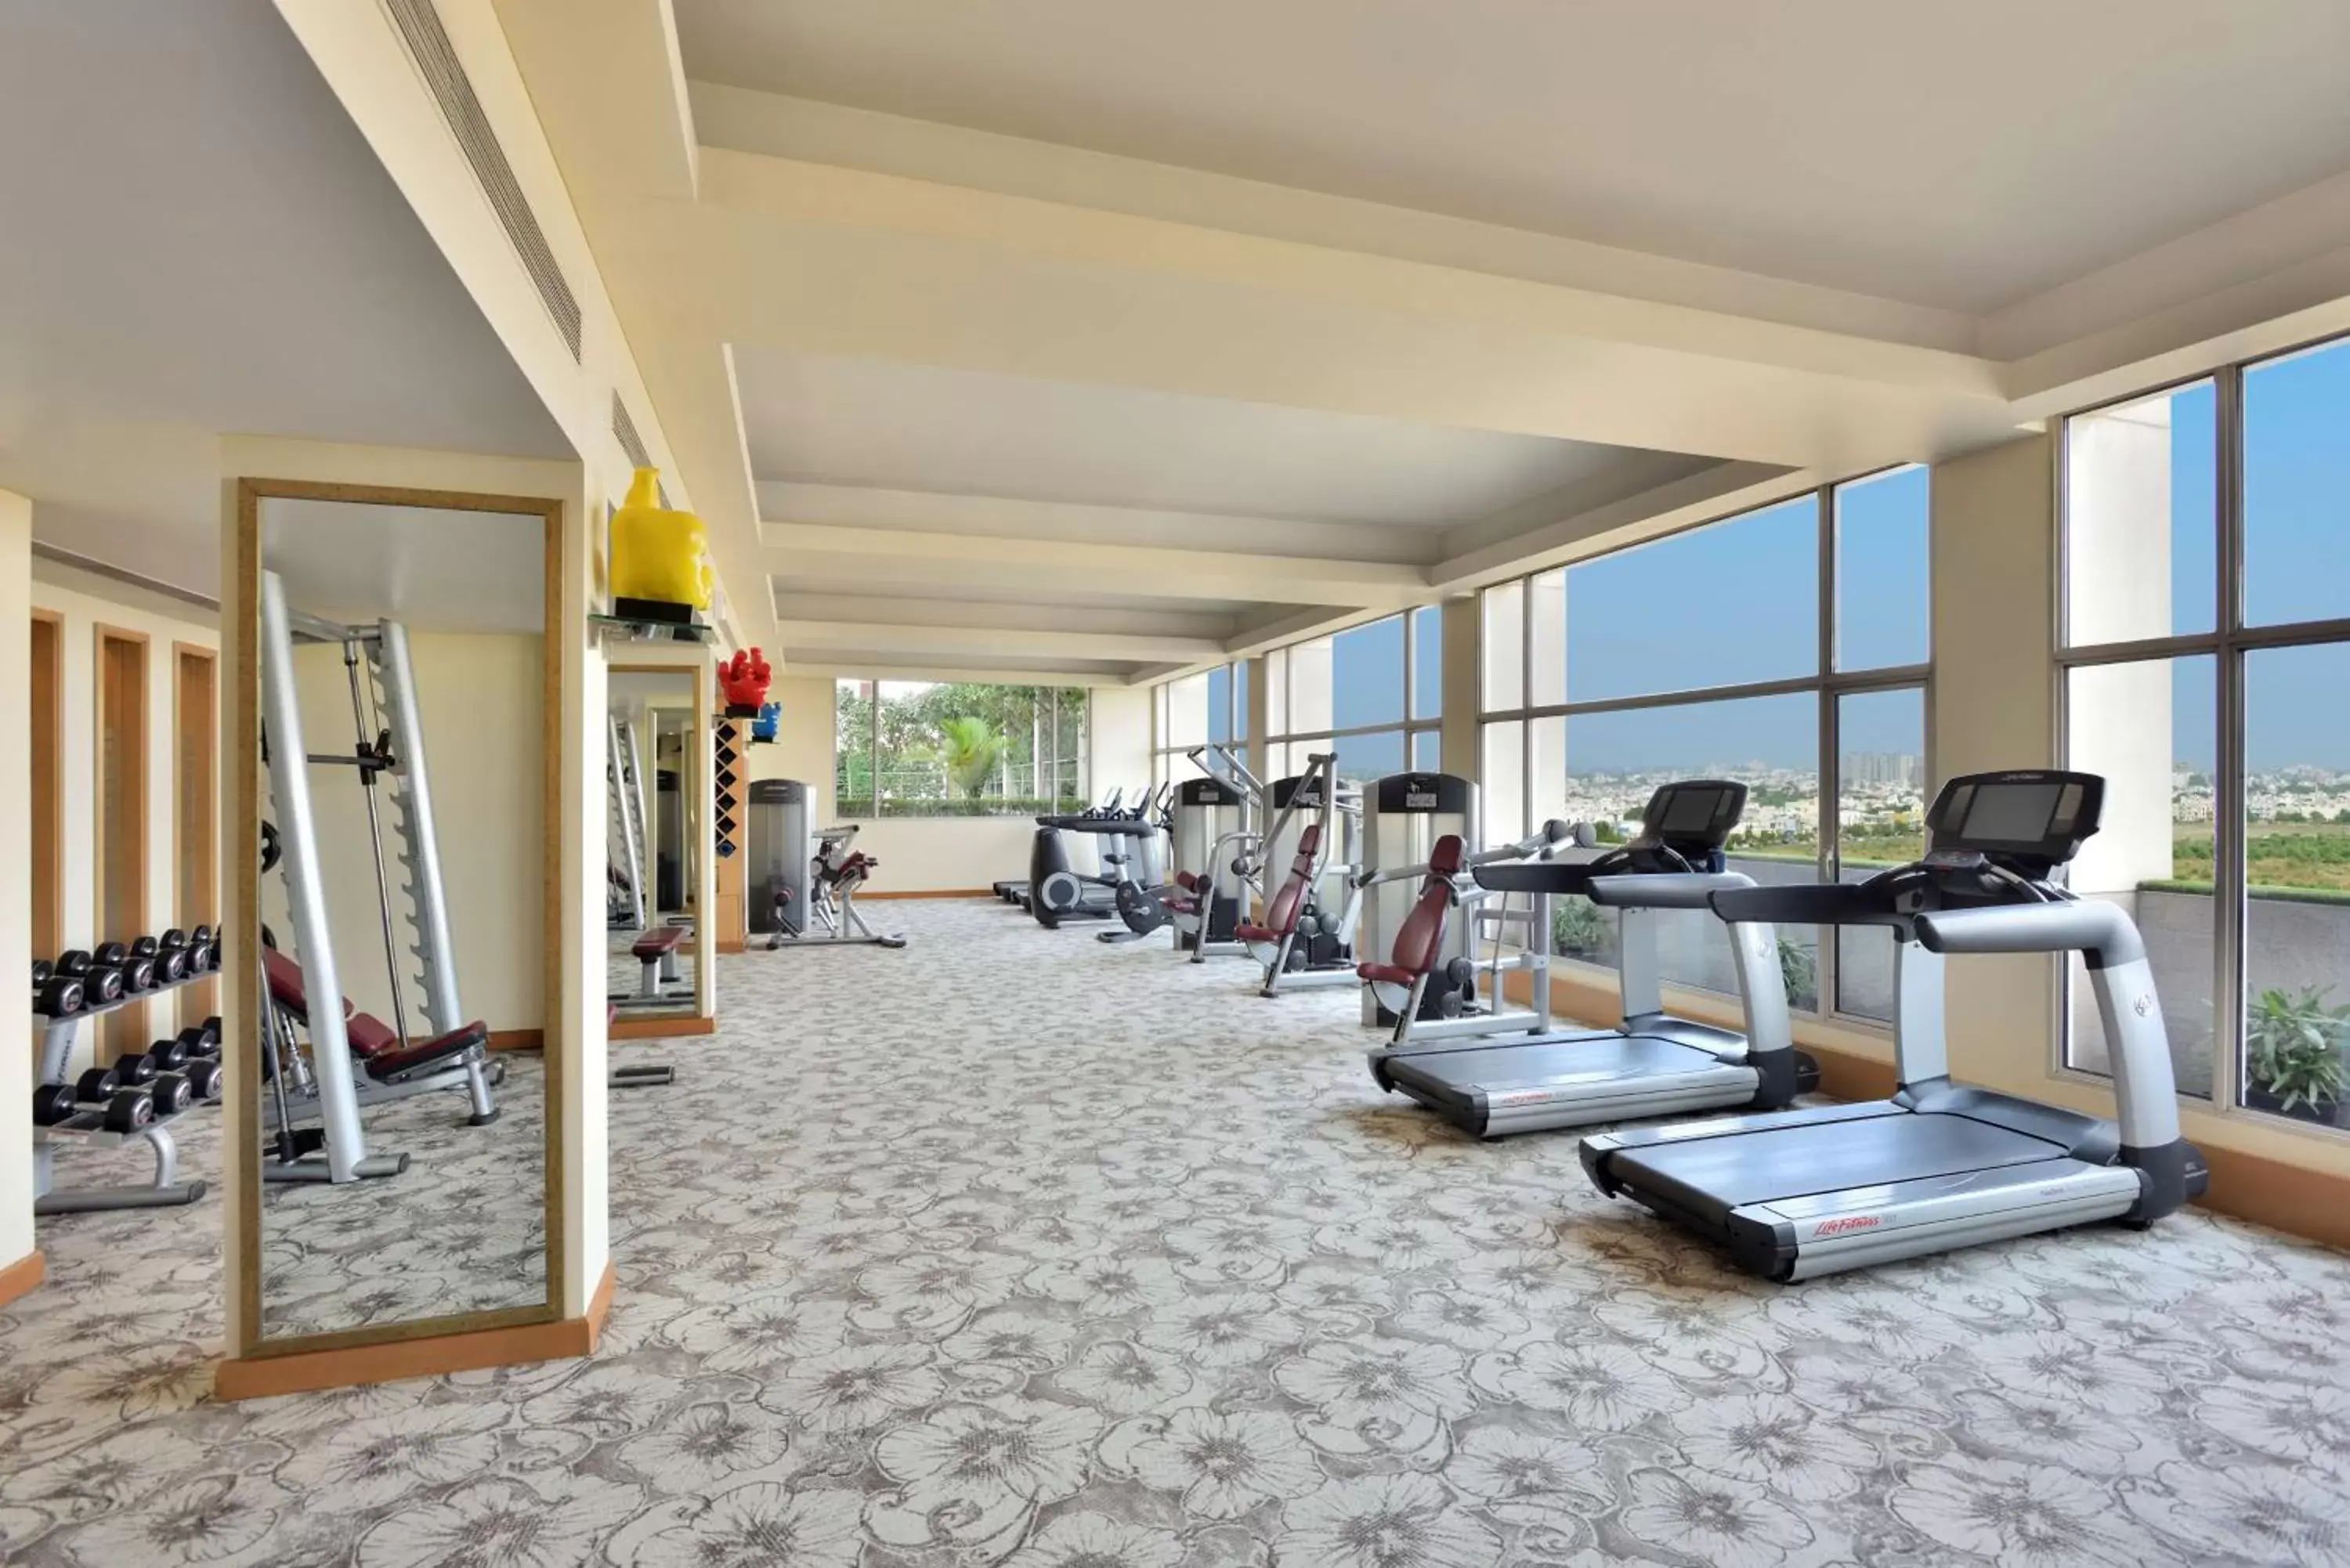 Spa and wellness centre/facilities, Fitness Center/Facilities in Radisson Blu Hotel, Indore